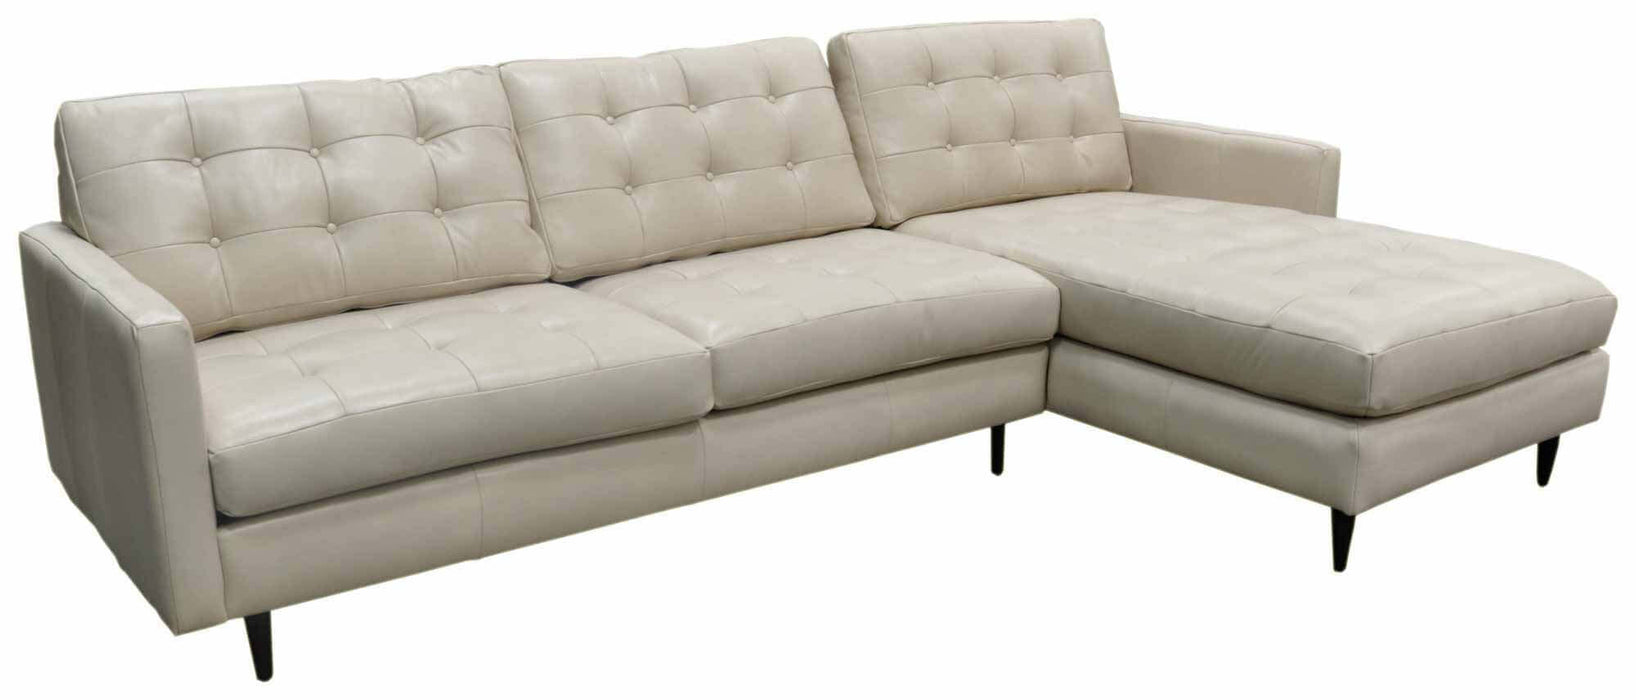 Essex Leather Sofa With Chaise | American Style | Wellington's Fine Leather Furniture